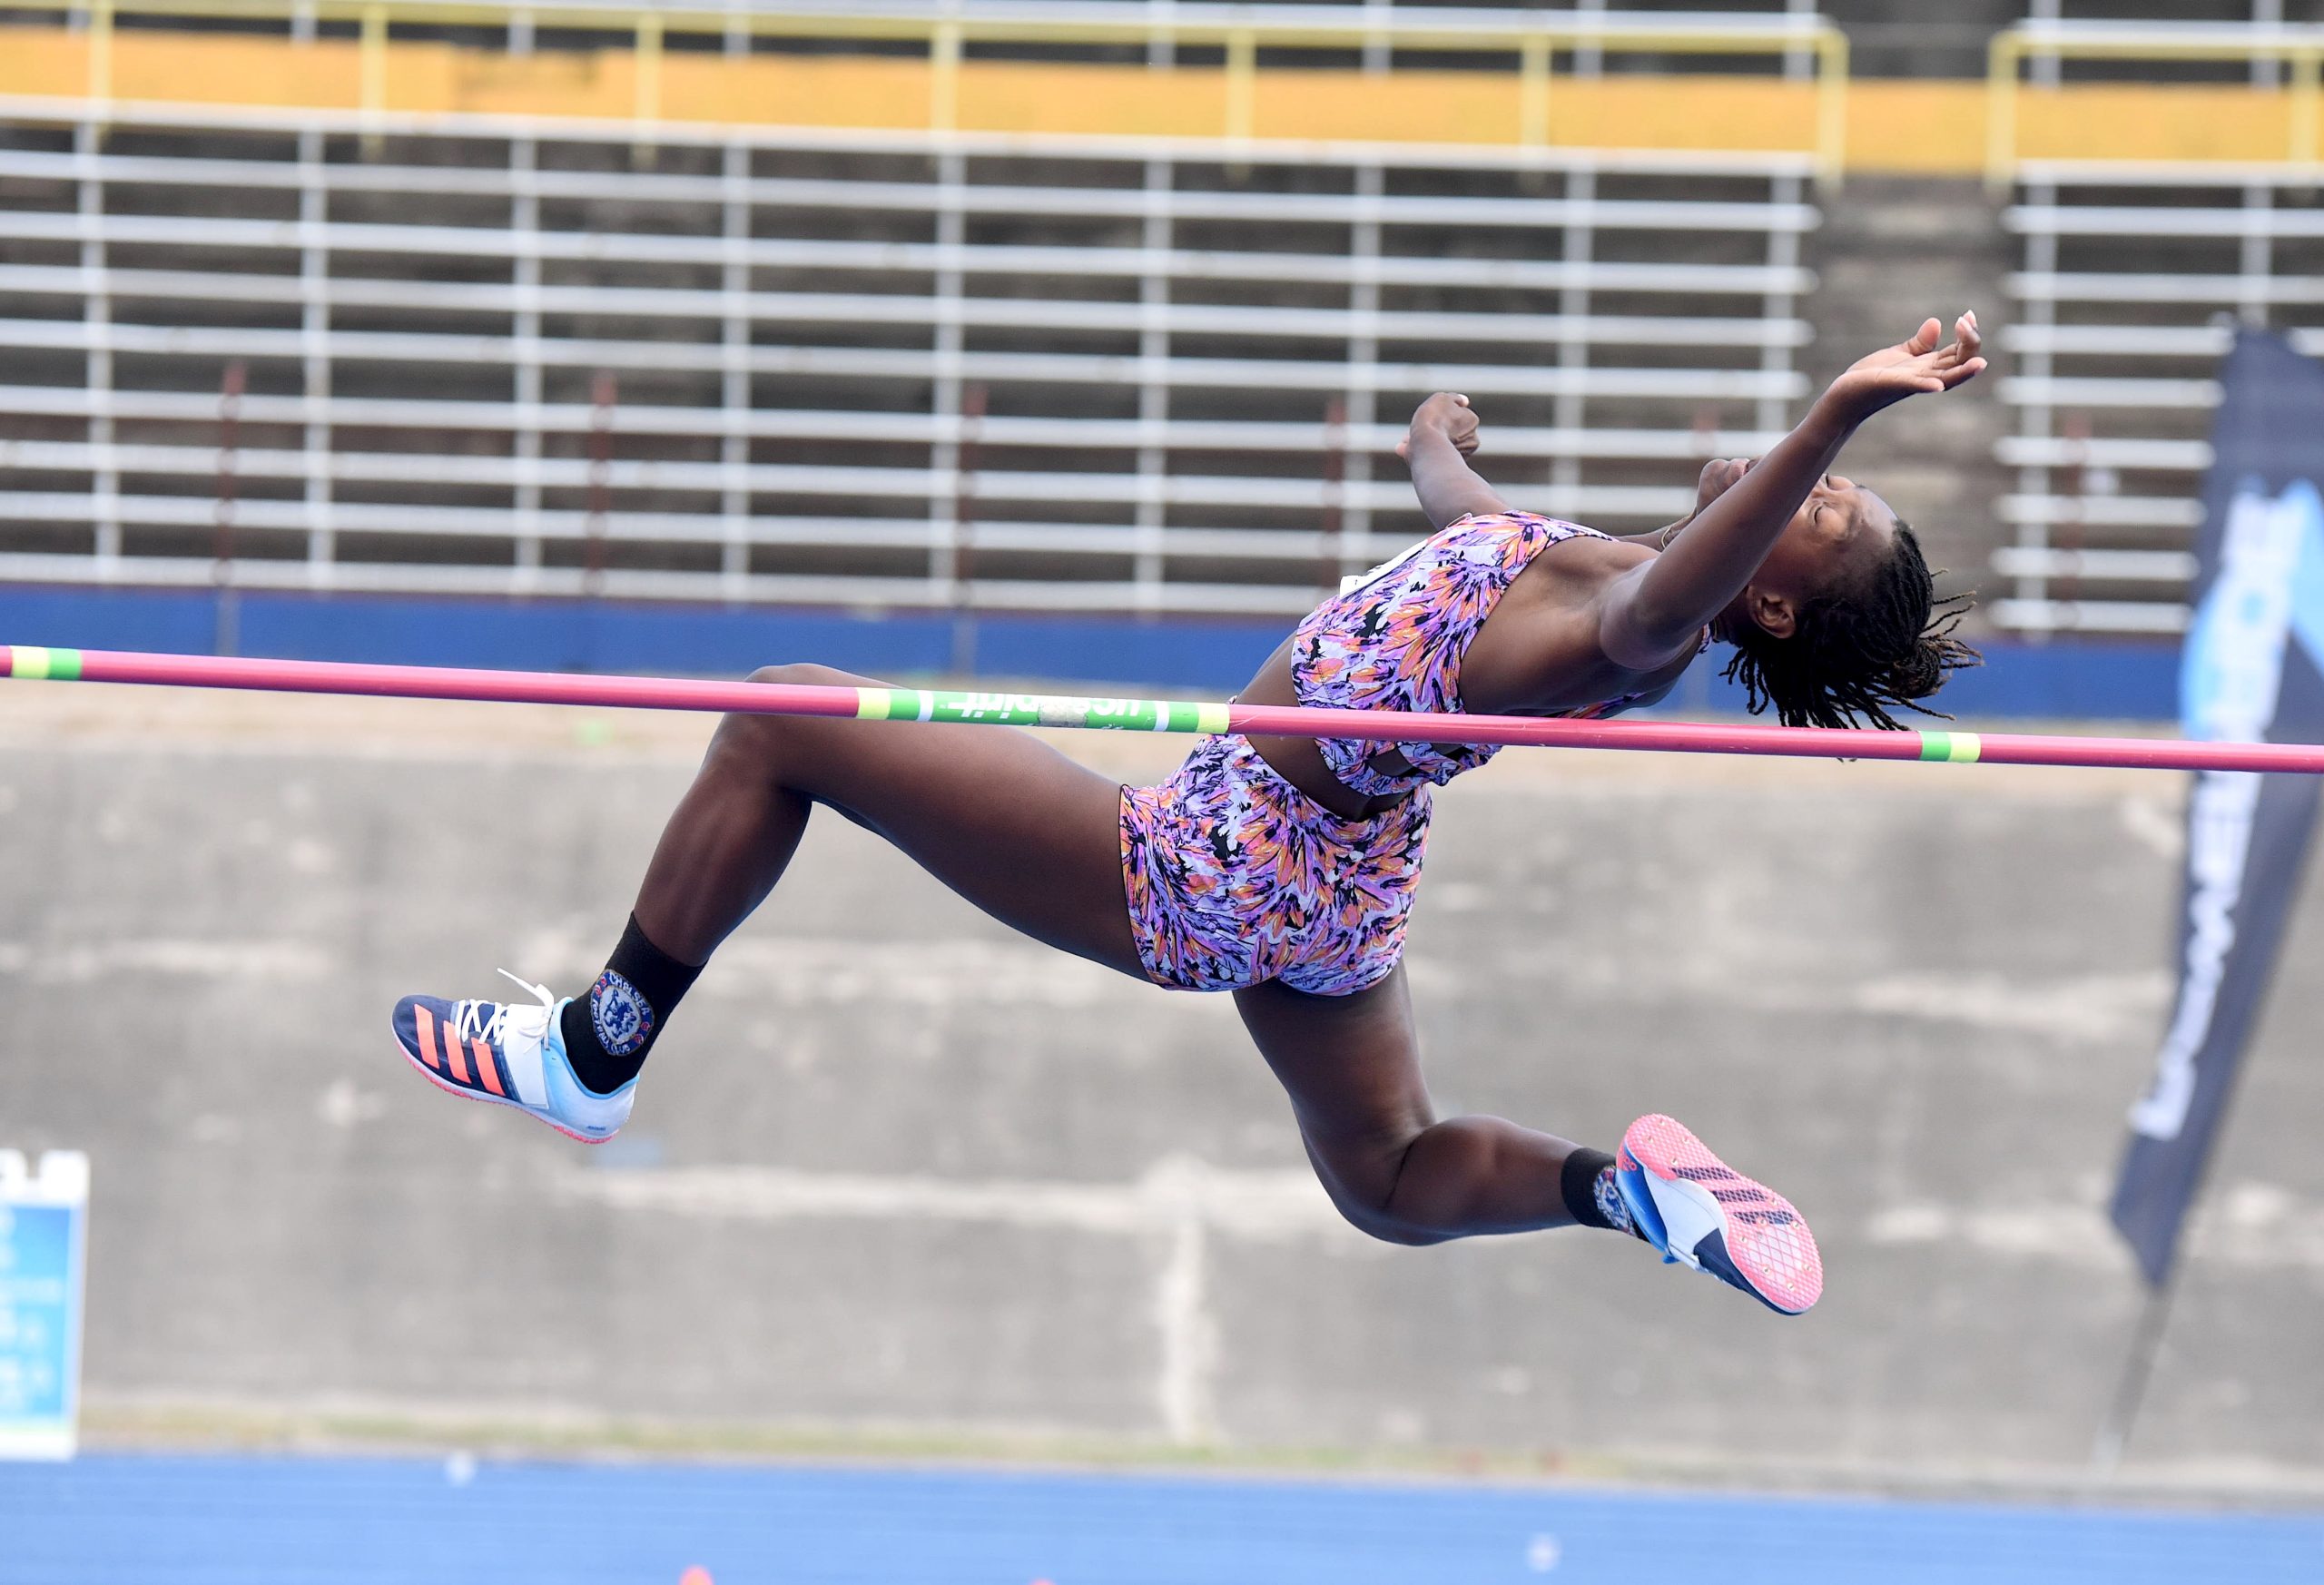 KImberly Williamson wins 7th high jump national title at Jamaica Trials